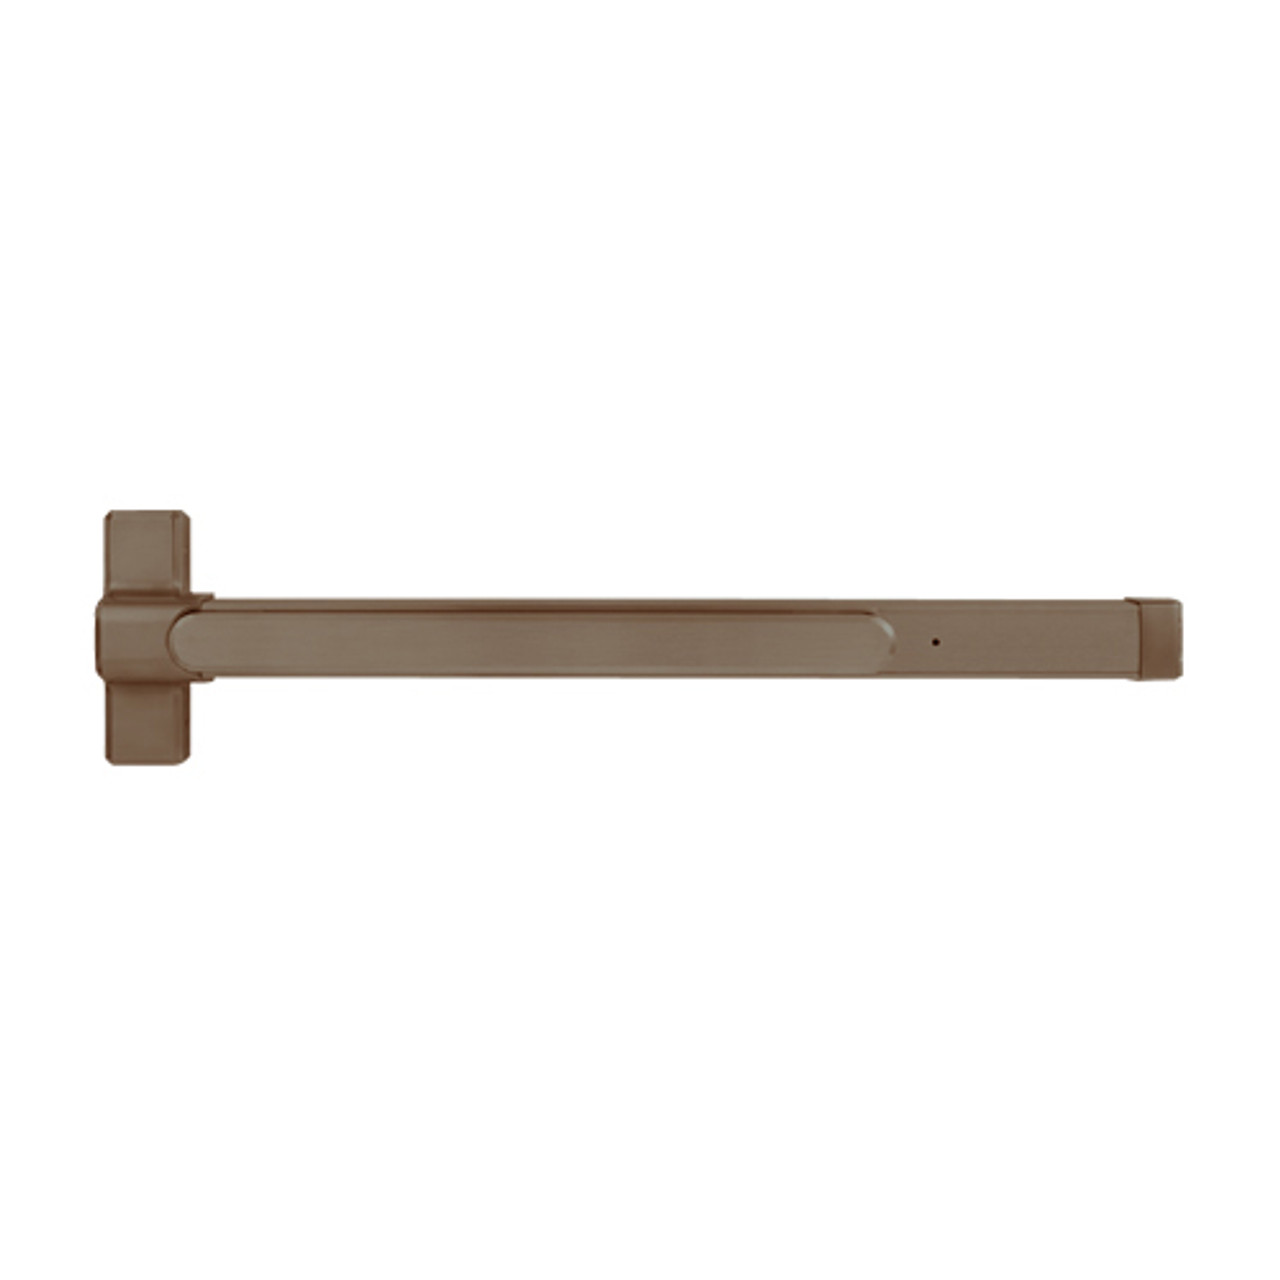 QED119LRX-48-7-313AN Stanley QED100 Series Heavy Duty Surface Vertical Rod Fire Rated Exit Device in Anodized Duranodic Bronze Finish